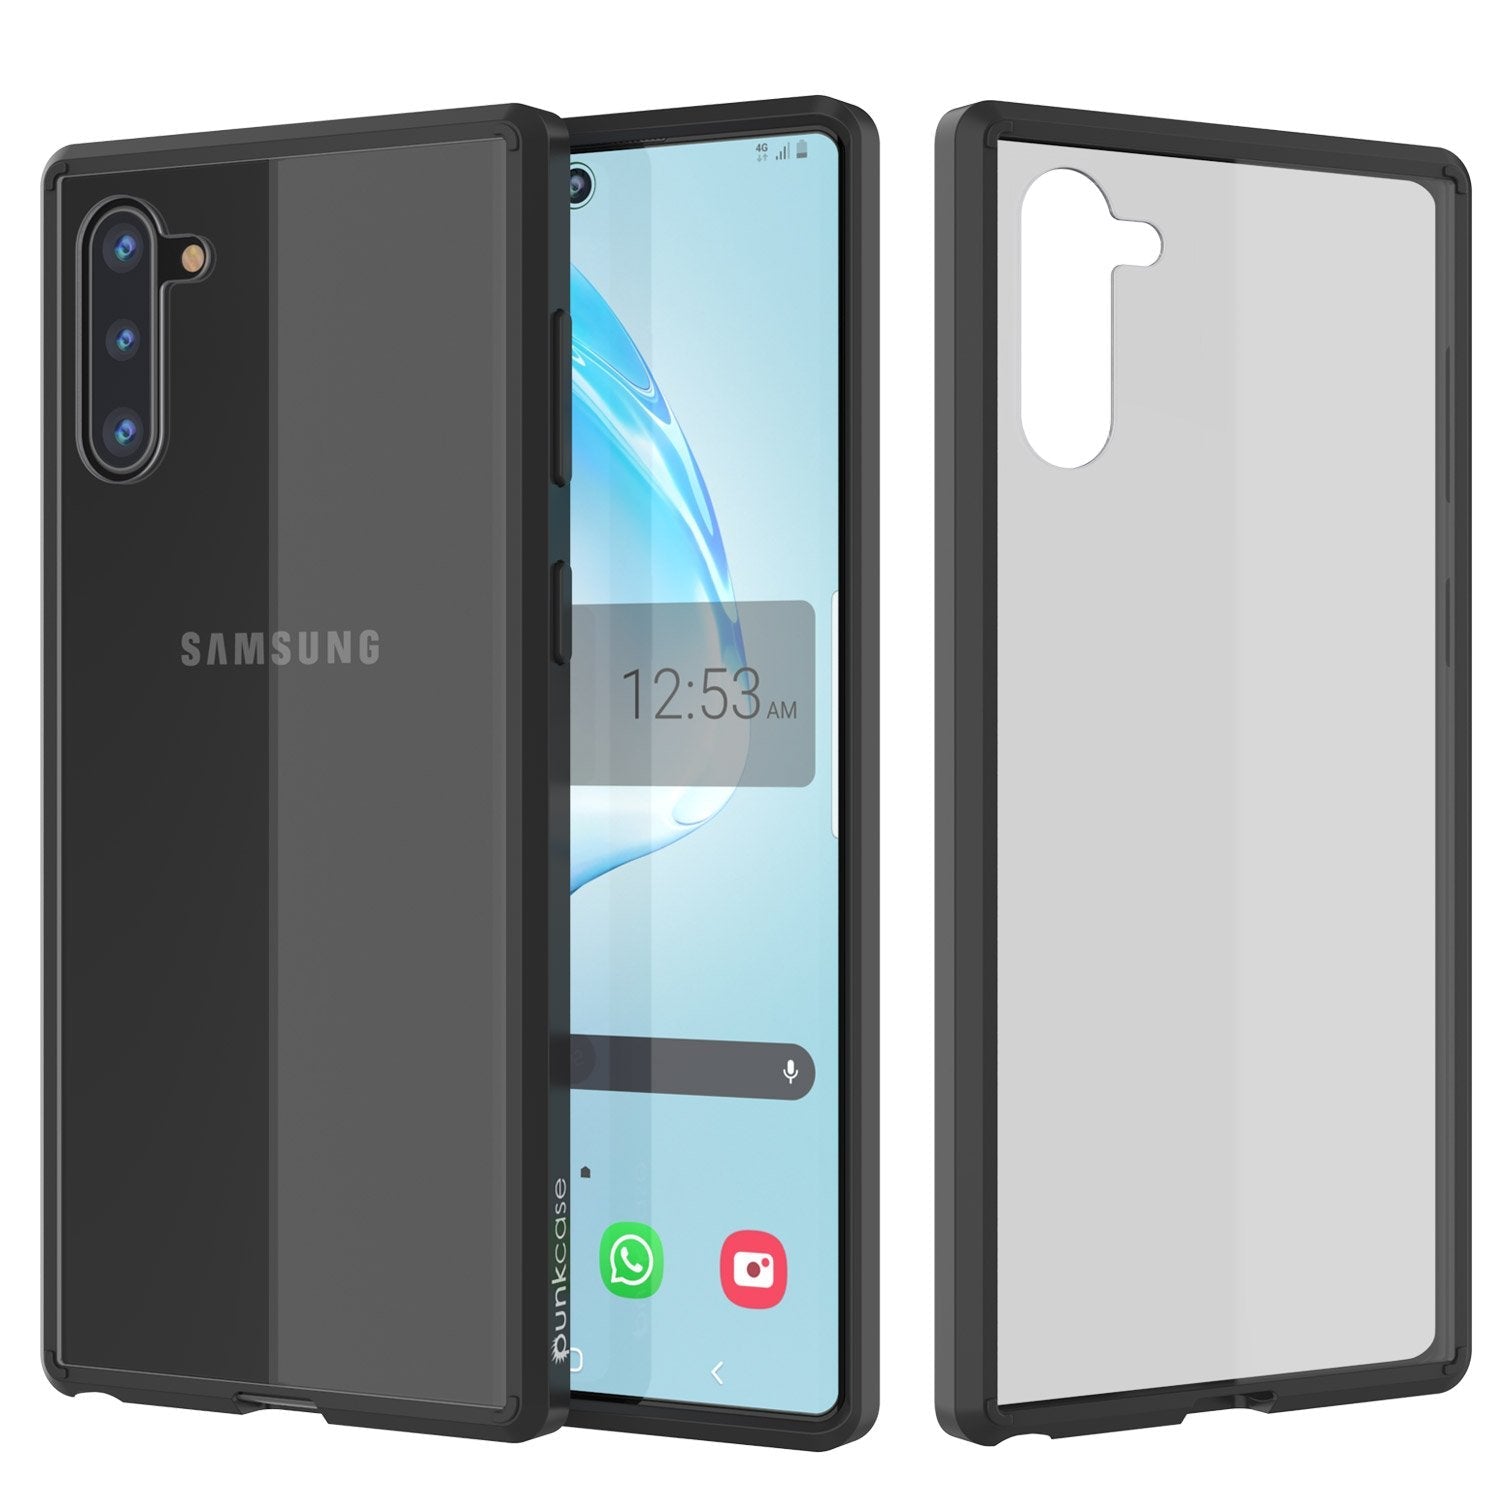 Galaxy Note 10 Punkcase Lucid-2.0 Series Slim Fit Armor Black Case Cover (Color in image: Black)